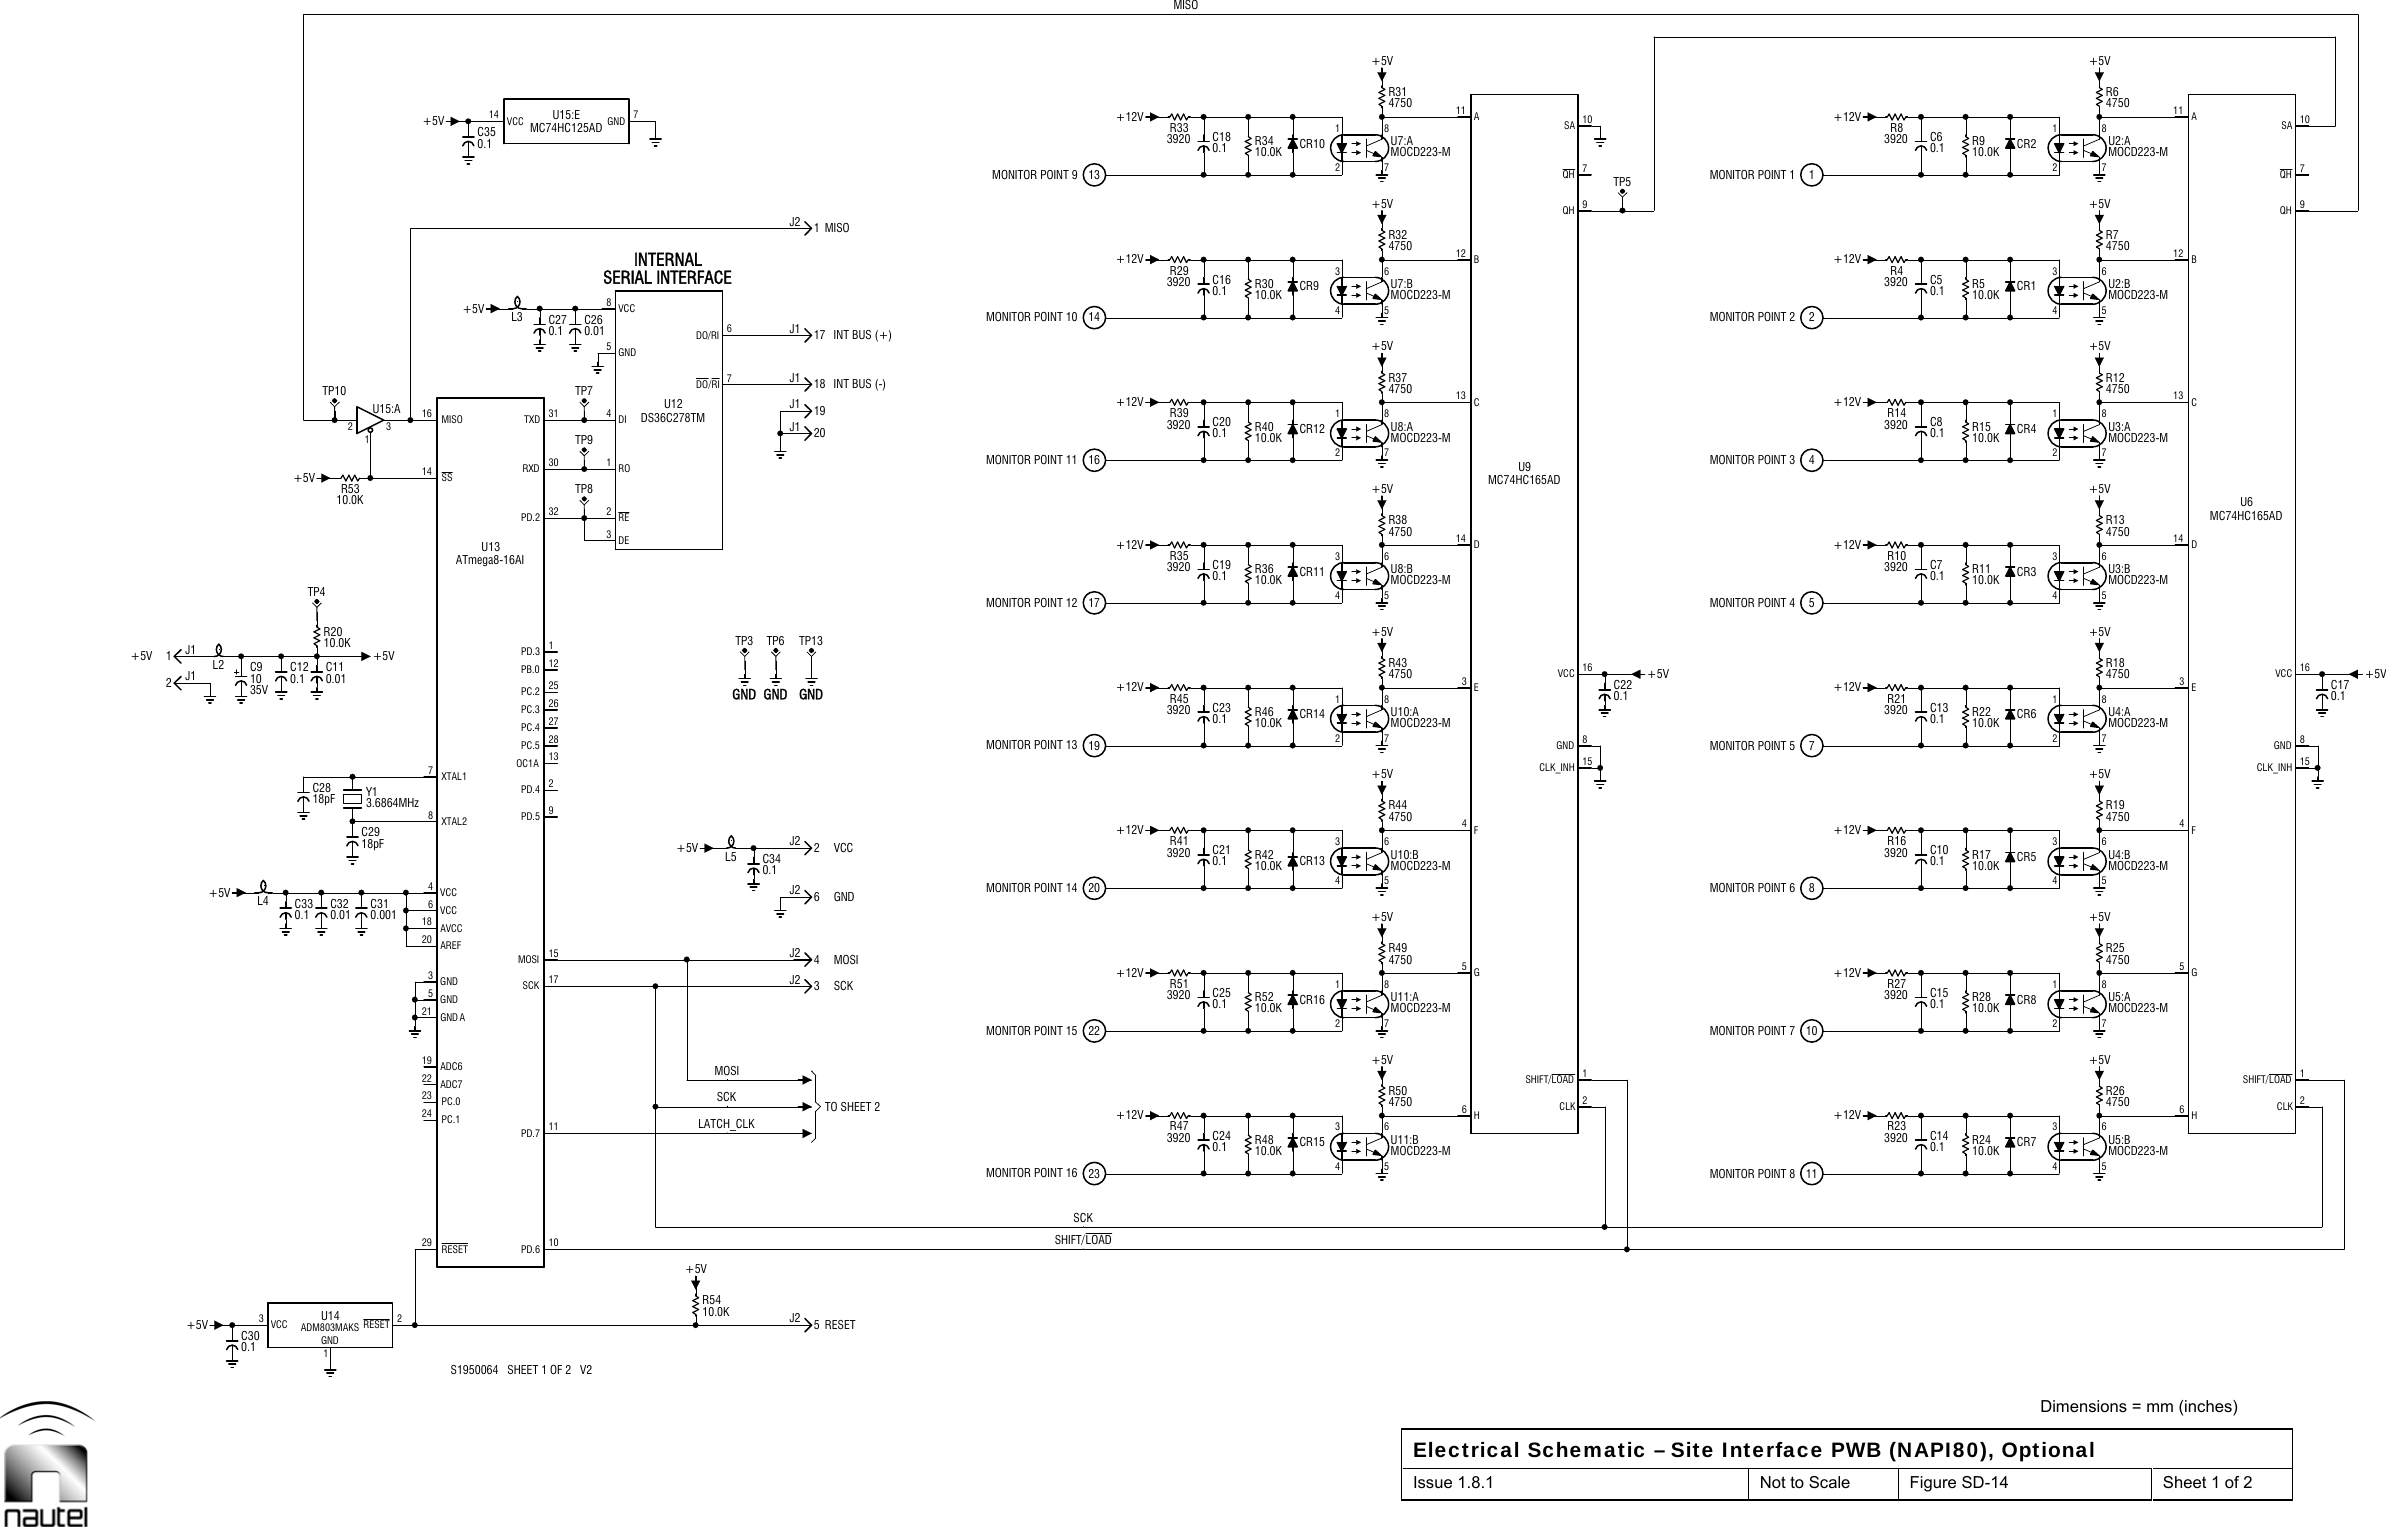  Dimensions = mm (inches) Electrical Schematic – Site Interface PWB (NAPI80), Optional Issue 1.8.1  Not to Scale  Figure SD-14  Sheet 1 of 2  2923SS14APD.7MOSIPD.5PD.4PC.5PC.4PC.3PC.2PD.3PD.2RXDTXD2RE1RO+5V19174F75C91035V248716C350.1PD.6SCKOC1APB.0L34DI3DEGNDTP3SCKVCCMISO232220161413MISO3E11108421C330.11J1+5V+5V10PC.019 ADC621 GND1518 AVCCXTAL22XTAL12826251213230MISO+5V+5VSCK7DO/RI5GND6DO/RI8VCCINTERNALRESET5J2TO SHEET 2MOSI4J220J118J1 INT BUS (-)17J1 INT BUS (+)MONITOR POINT 16MONITOR POINT 14MONITOR POINT 13MONITOR POINT 12MONITOR POINT 11MONITOR POINT 9C240.1+12V+12V+12V R453920C200.1+12V+12VCR154750R50+5V+5VCR124750R37+5V+5V2CLK8GNDC220.1MC74HC165ADU99QH7QH10SAMONITOR POINT 8MONITOR POINT 6MONITOR POINT 5MONITOR POINT 4MONITOR POINT 3MONITOR POINT 1C140.1+12V+12V+12V R213920C80.1+12V+12VCR74750R26+5V+5VCR44750R12+5V+5V2CLK8GND9QH7QH10SA2J1C300.1L4C2818pFC2918pFC110.01C120.110.0KR20TP4R5310.0KRESETPC.1 1122 ADC720 AREF173GND5GND9136VCC4VCC273110.0KR54MOSI+5VDS36C278TMU12TP9TP8SERIAL INTERFACEC260.013J2GND6J2C340.12J2GND GNDTP6 TP1319J11J2SCKMONITOR POINT 15MONITOR POINT 10+12V R473920C250.1R513920R413920 C210.1C230.1+12V+12VR393920C160.1R293920C180.1R3339203 64 5MOCD223-MU11:B+5VCR164750R491 82 7MOCD223-MU11:ACR133 64 5MOCD223-MU10:B4750R44+5V4750R43CR14+5V4750R381 82 7MOCD223-MU8:A+5VCR94750R323 64 5MOCD223-MU7:BCR104750R311 82 7MOCD223-MU7:A1SHIFT/LOAD15CLK_INH16VCCMONITOR POINT 7MONITOR POINT 2+12V R233920R273920 C150.1R163920 C100.1C130.1+12V+12VR143920R43920 C50.1R83920 C60.13 64 5MOCD223-MU5:BCR84750R251 82 7MOCD223-MU5:A+5VCR53 64 5MOCD223-MU4:B4750R19+5VCR64750R18+5V4750R131 82 7MOCD223-MU3:A+5VCR14750R73 64 5MOCD223-MU2:BCR24750R61 82 7MOCD223-MU2:A1SHIFT/LOAD15CLK_INH16VCCMC74HC165ADU6C320.01TP10ATmega8-16AIU13TP7C190.1R3539201 82 7MOCD223-MU10:ACR113 64 5MOCD223-MU8:BTP5R103920 C70.11 82 7MOCD223-MU4:ACR33 64 5MOCD223-MU3:BS1950064   SHEET 1 OF 2   V2+5VL2 +5VSHIFT/LOAD10.0KR485G10.0KR4012 B11 A10.0KR245G4F10.0KR1512 B11 AC170.13VCC1GND2RESETU14ADM803MAKSLATCH_CLK+5VY13.6864MHzL52 31U15:AC270.114 VCC 7GNDU15:EMC74HC125AD6H10.0KR5210.0KR4210.0KR4614 D13 C10.0KR3010.0KR346H10.0KR2810.0KR17+5V10.0KR223E14 D13 C10.0KR510.0KR9+5VC310.00110.0KR36 10.0KR11